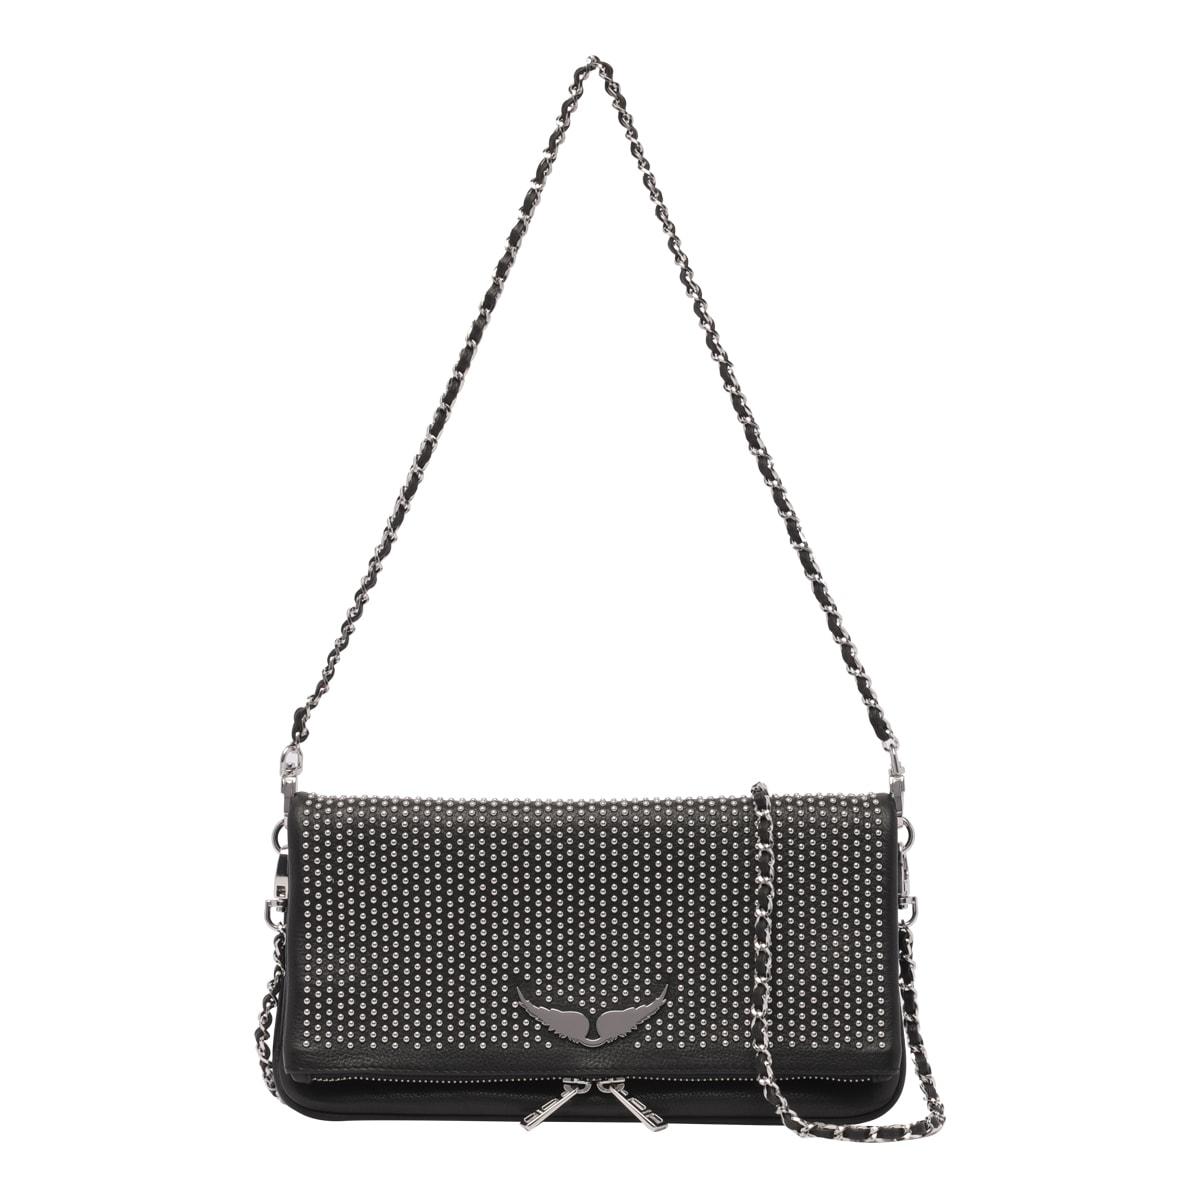 ZADIG & VOLTAIRE: Rock bag, black-gold (carryover) – My o My